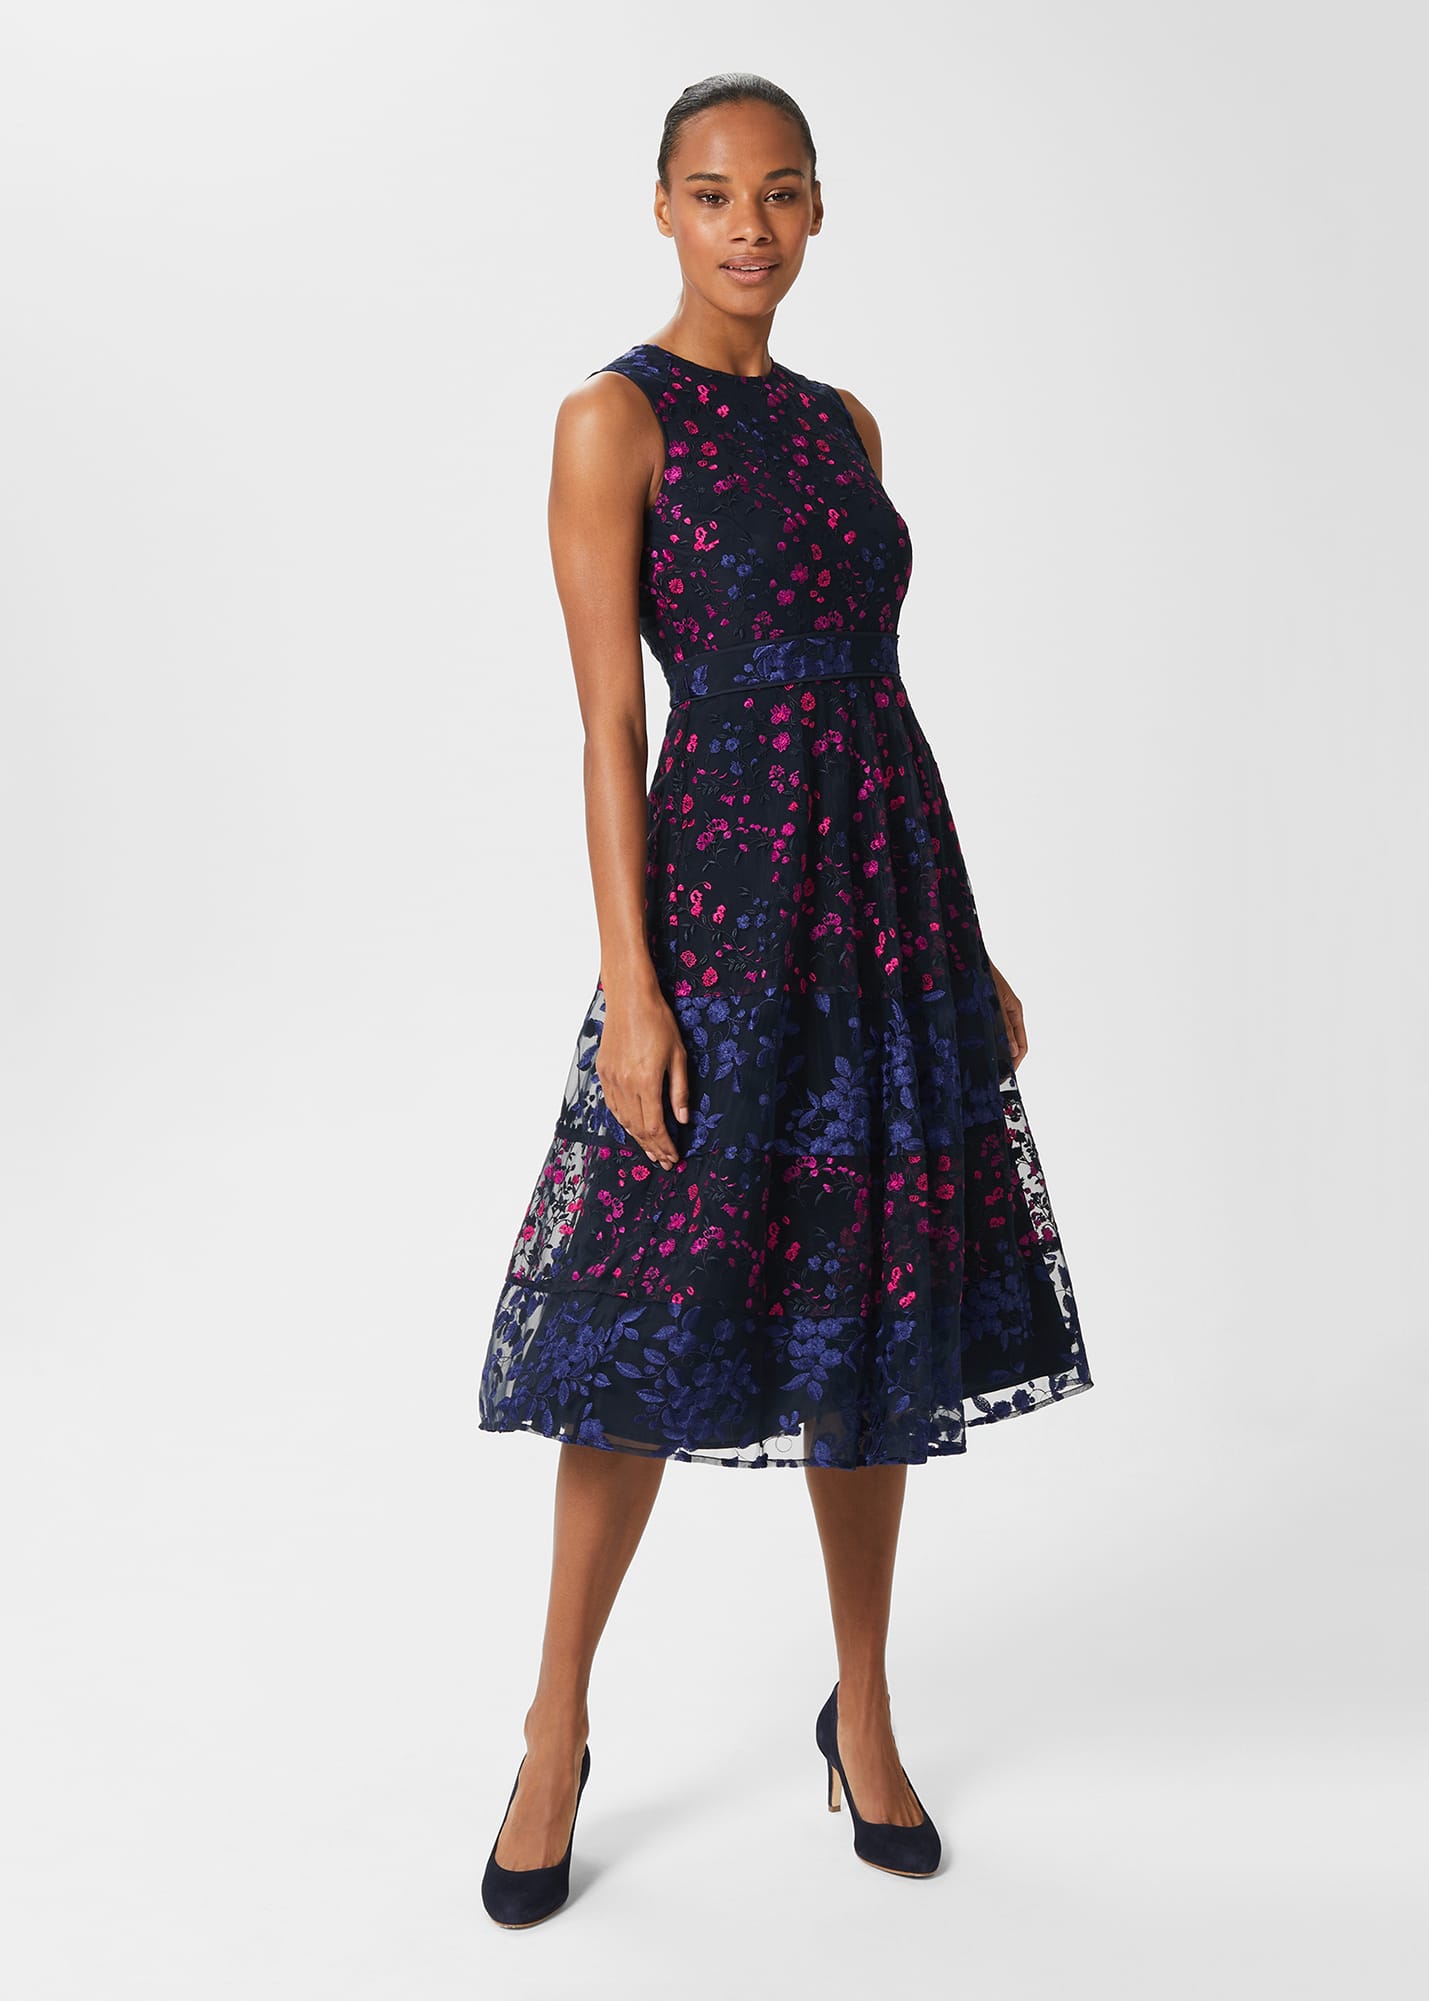 Hobbs Women's Kasia Floral Embroidered Dress - Navy Multi